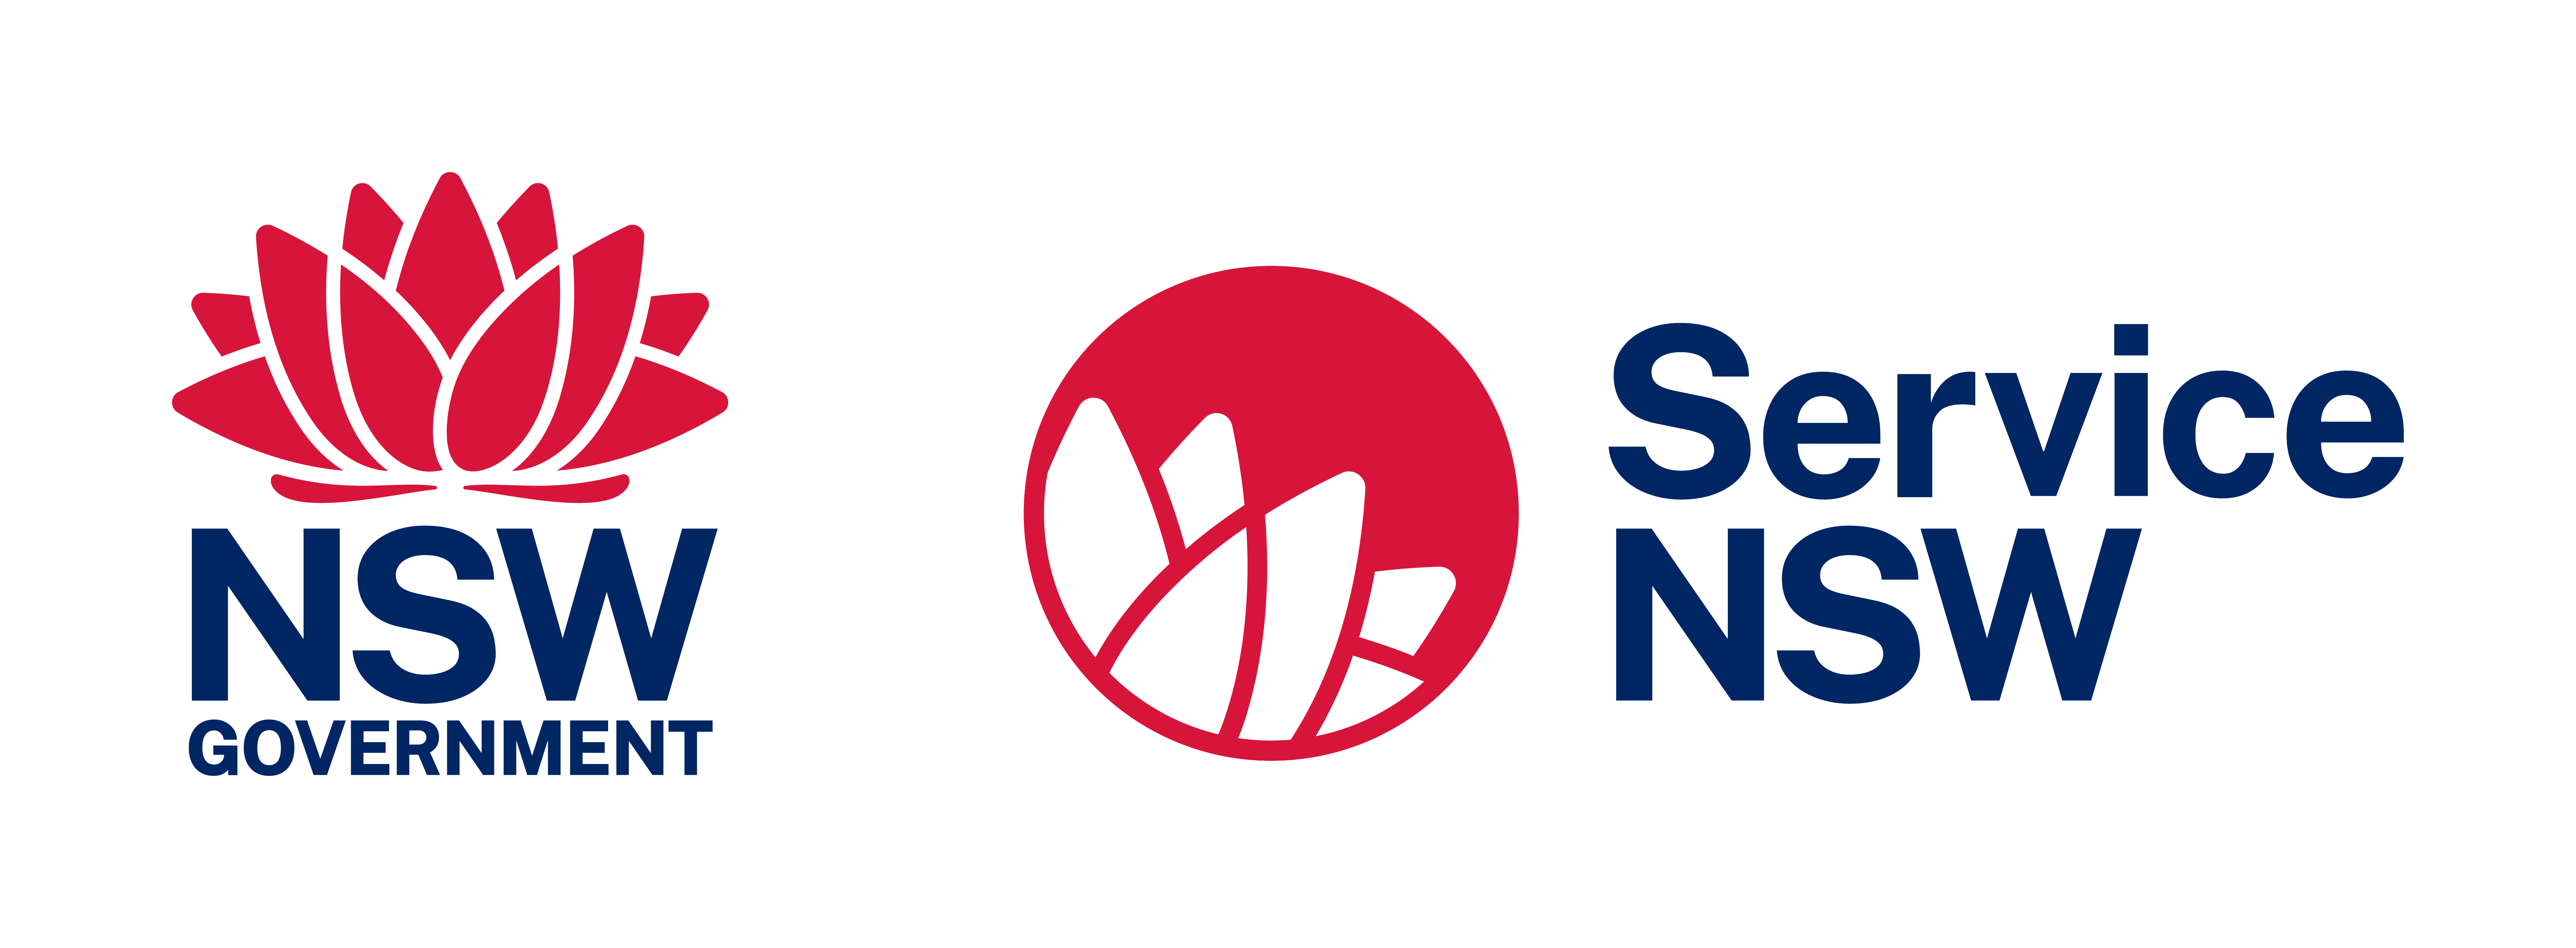 NSW Government and Service NSW logo